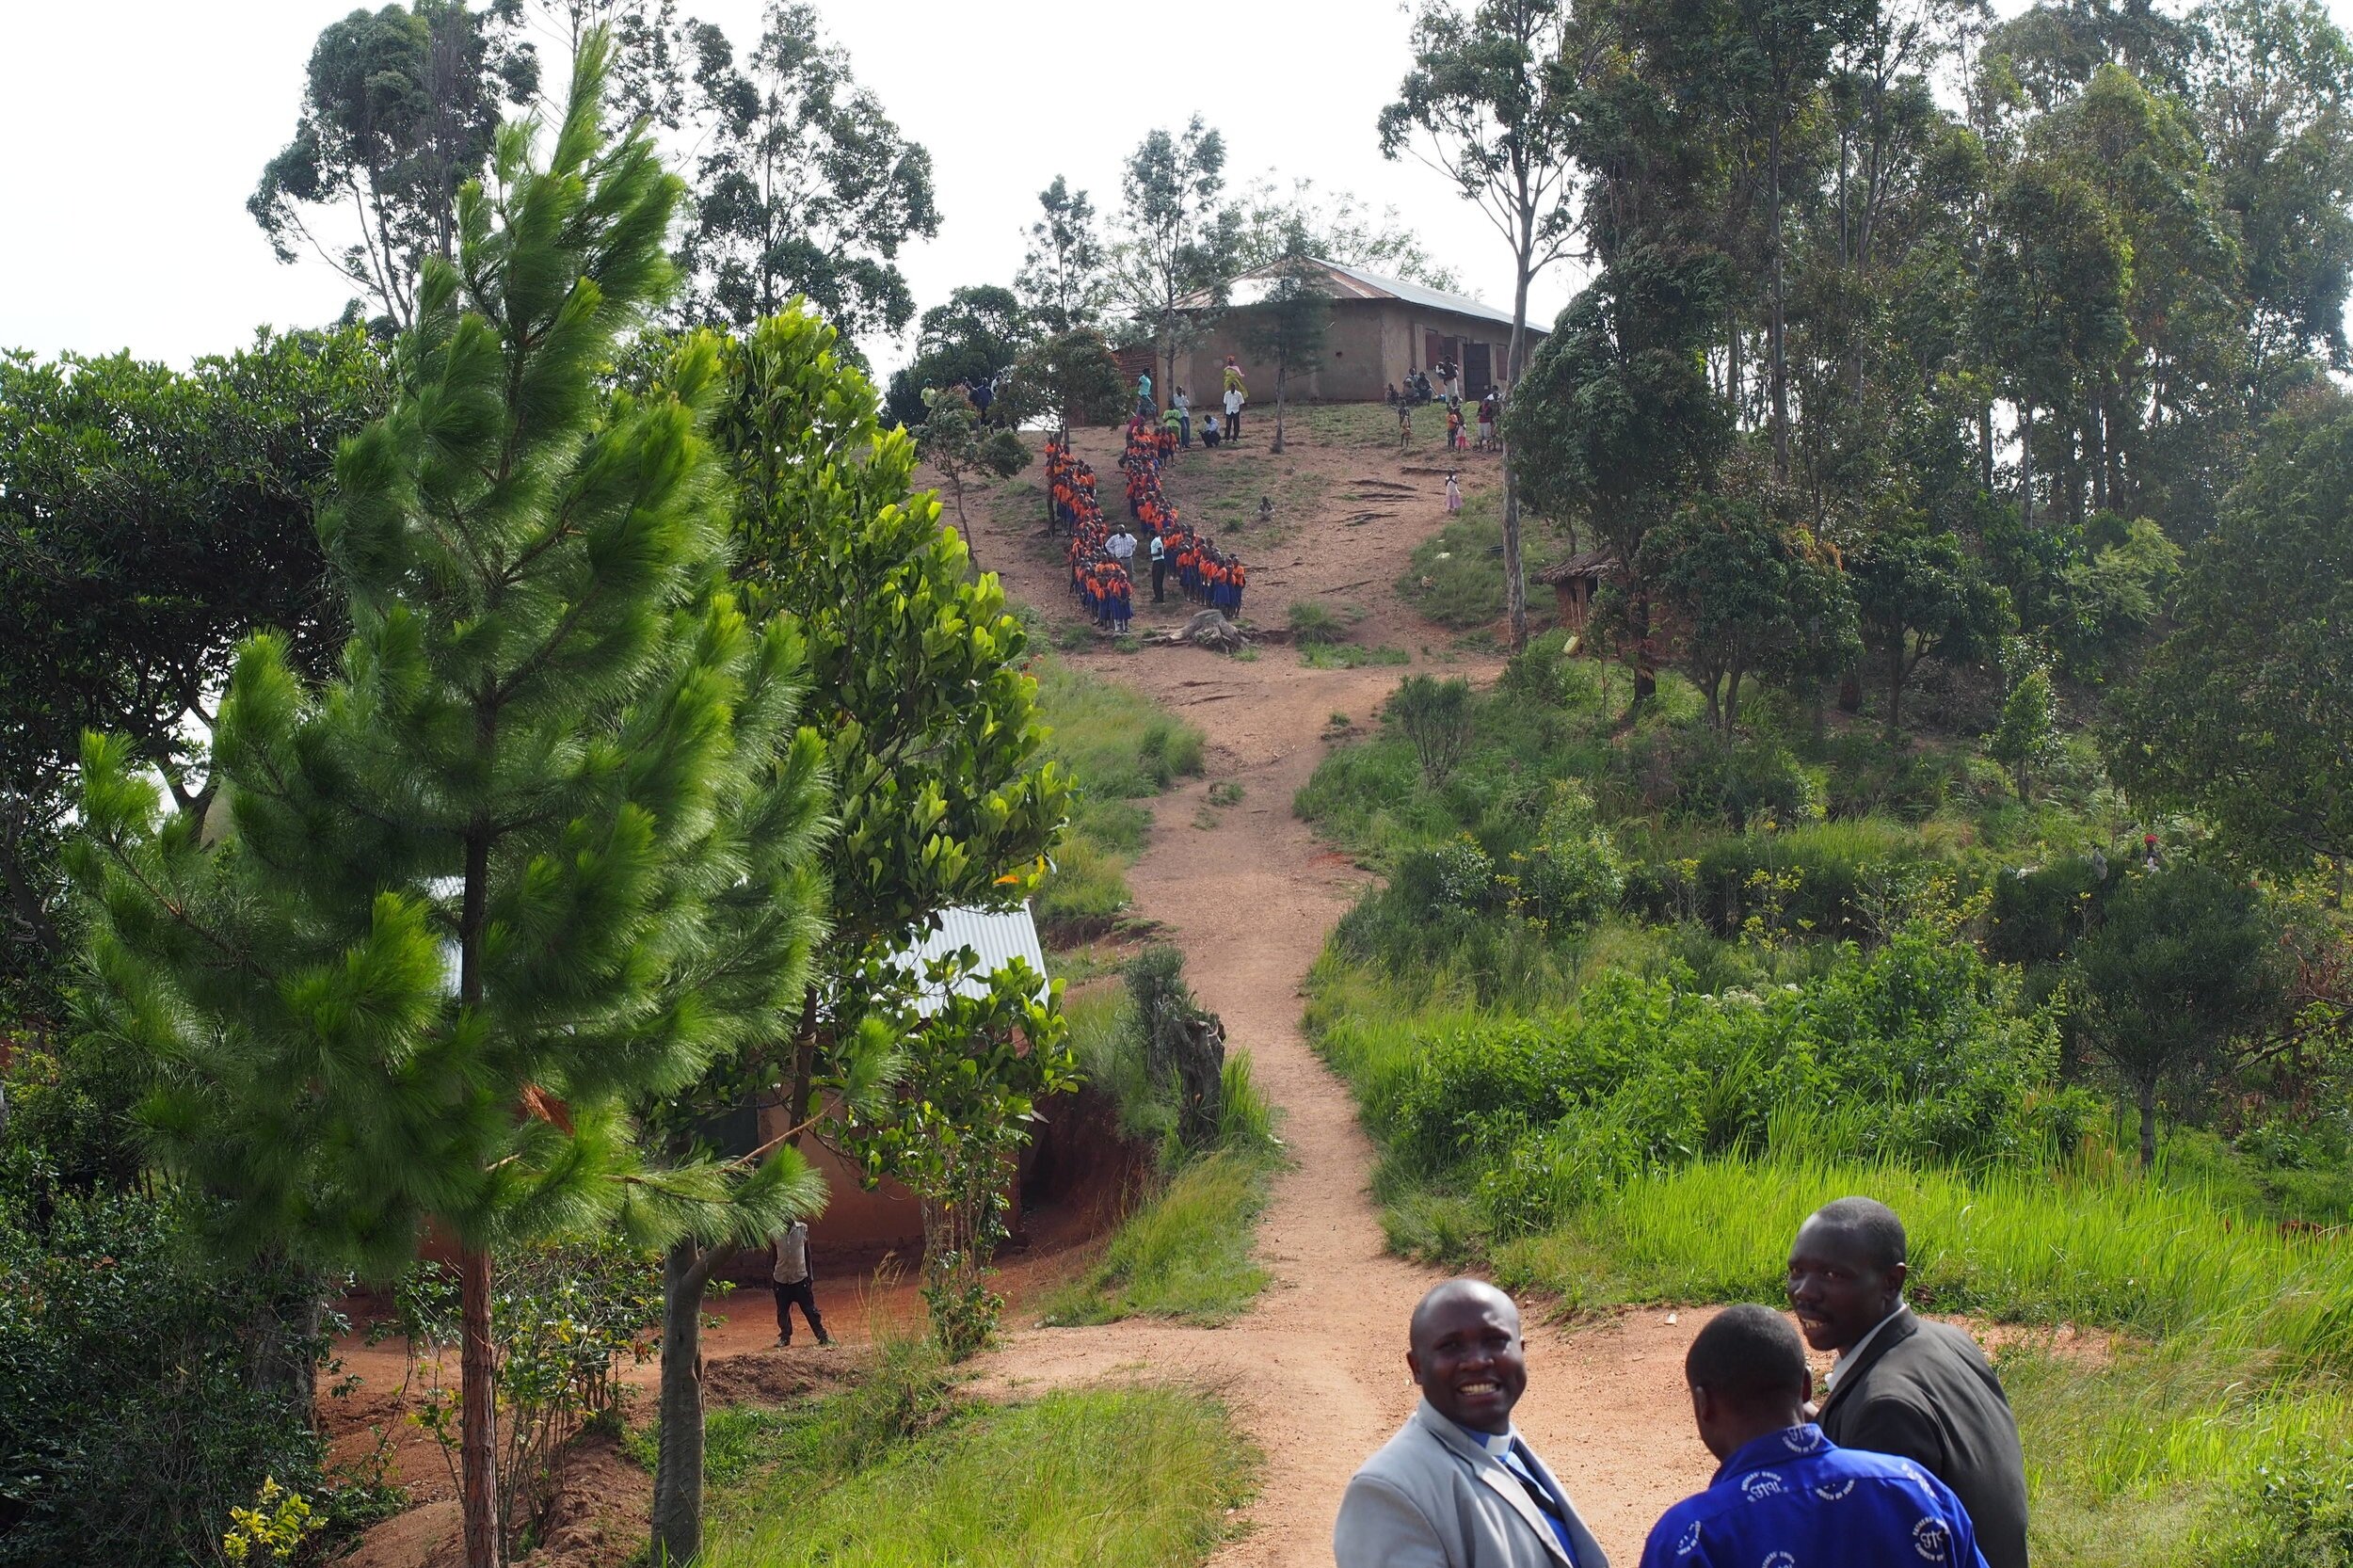 The school in the Rwenzori foothills